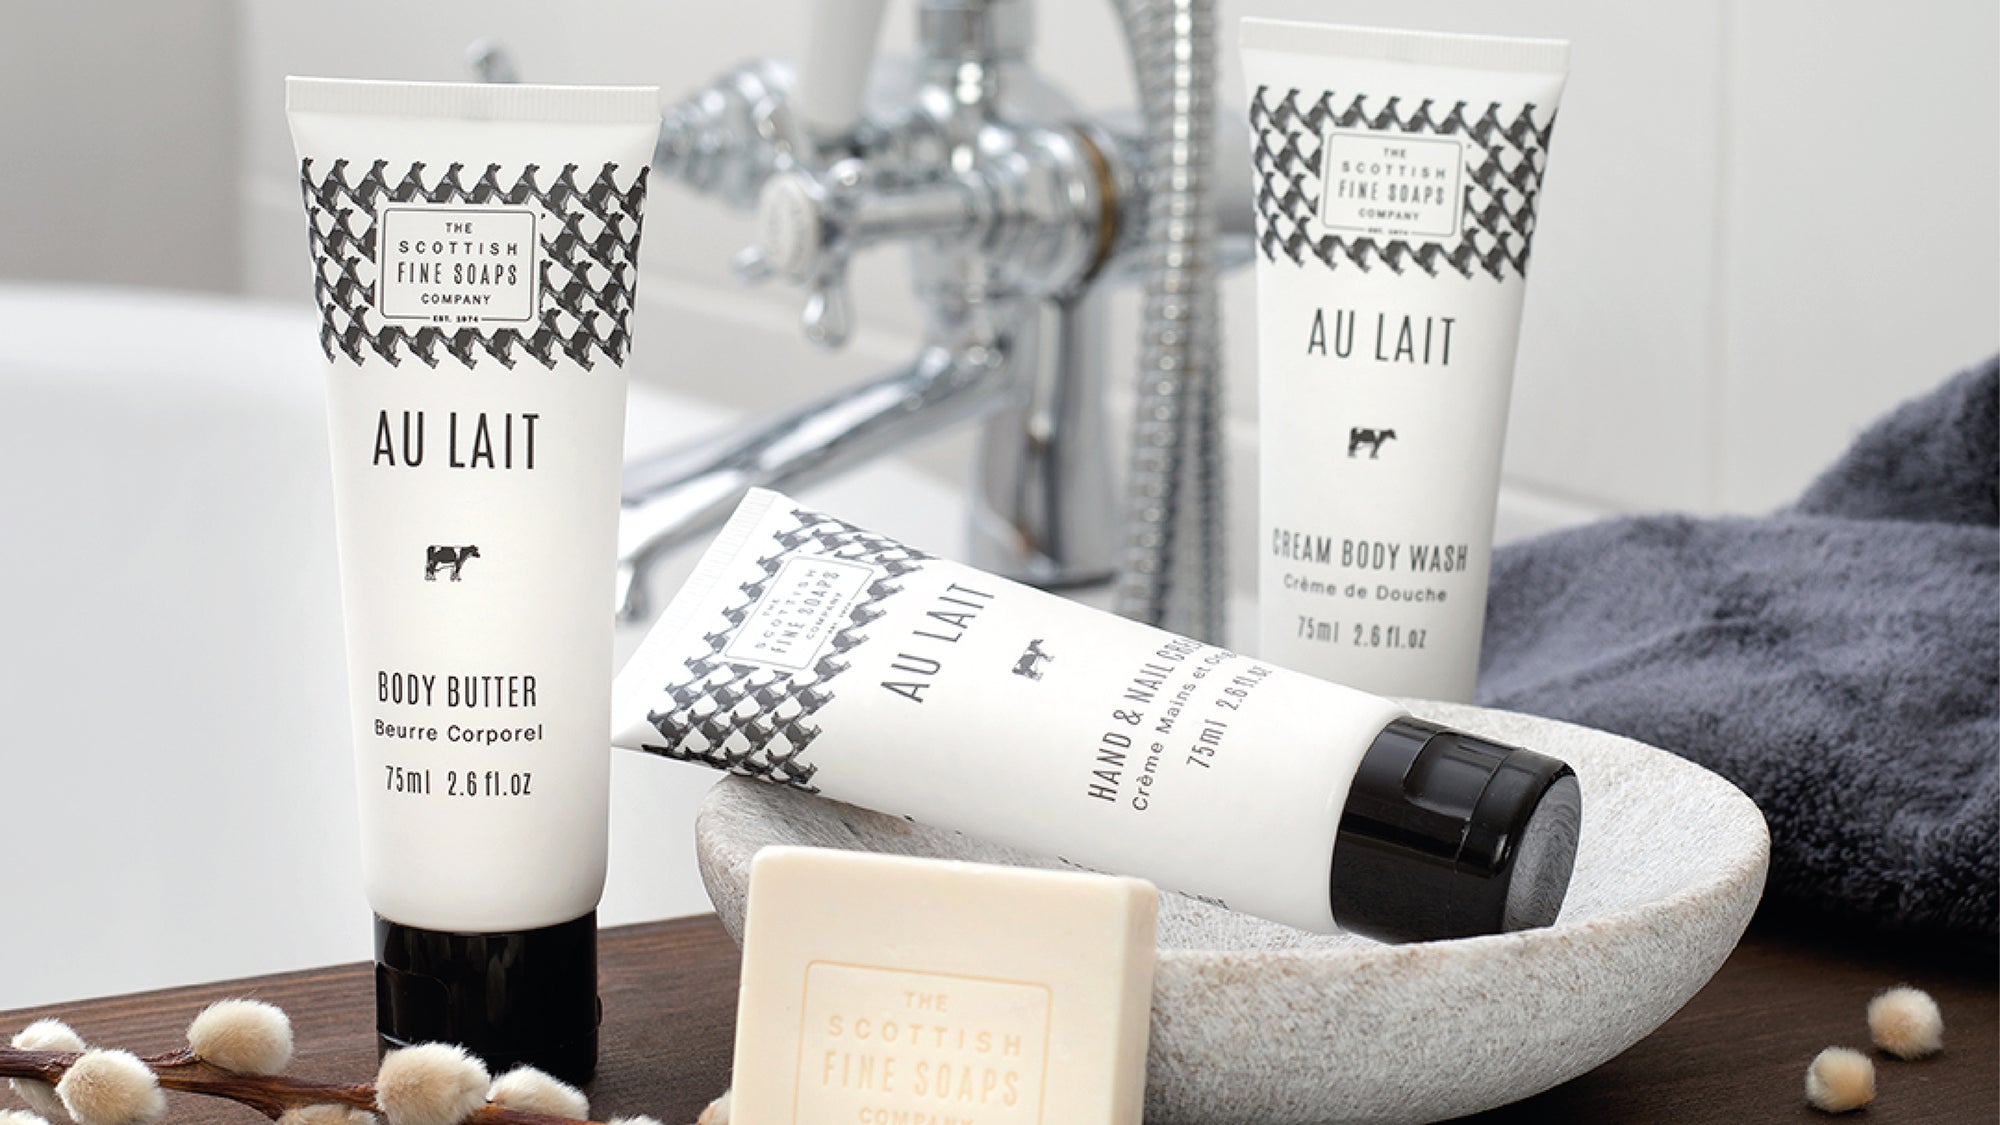 Choosing The Perfect Mother's Day Gift Set With Scottish Fine Soaps